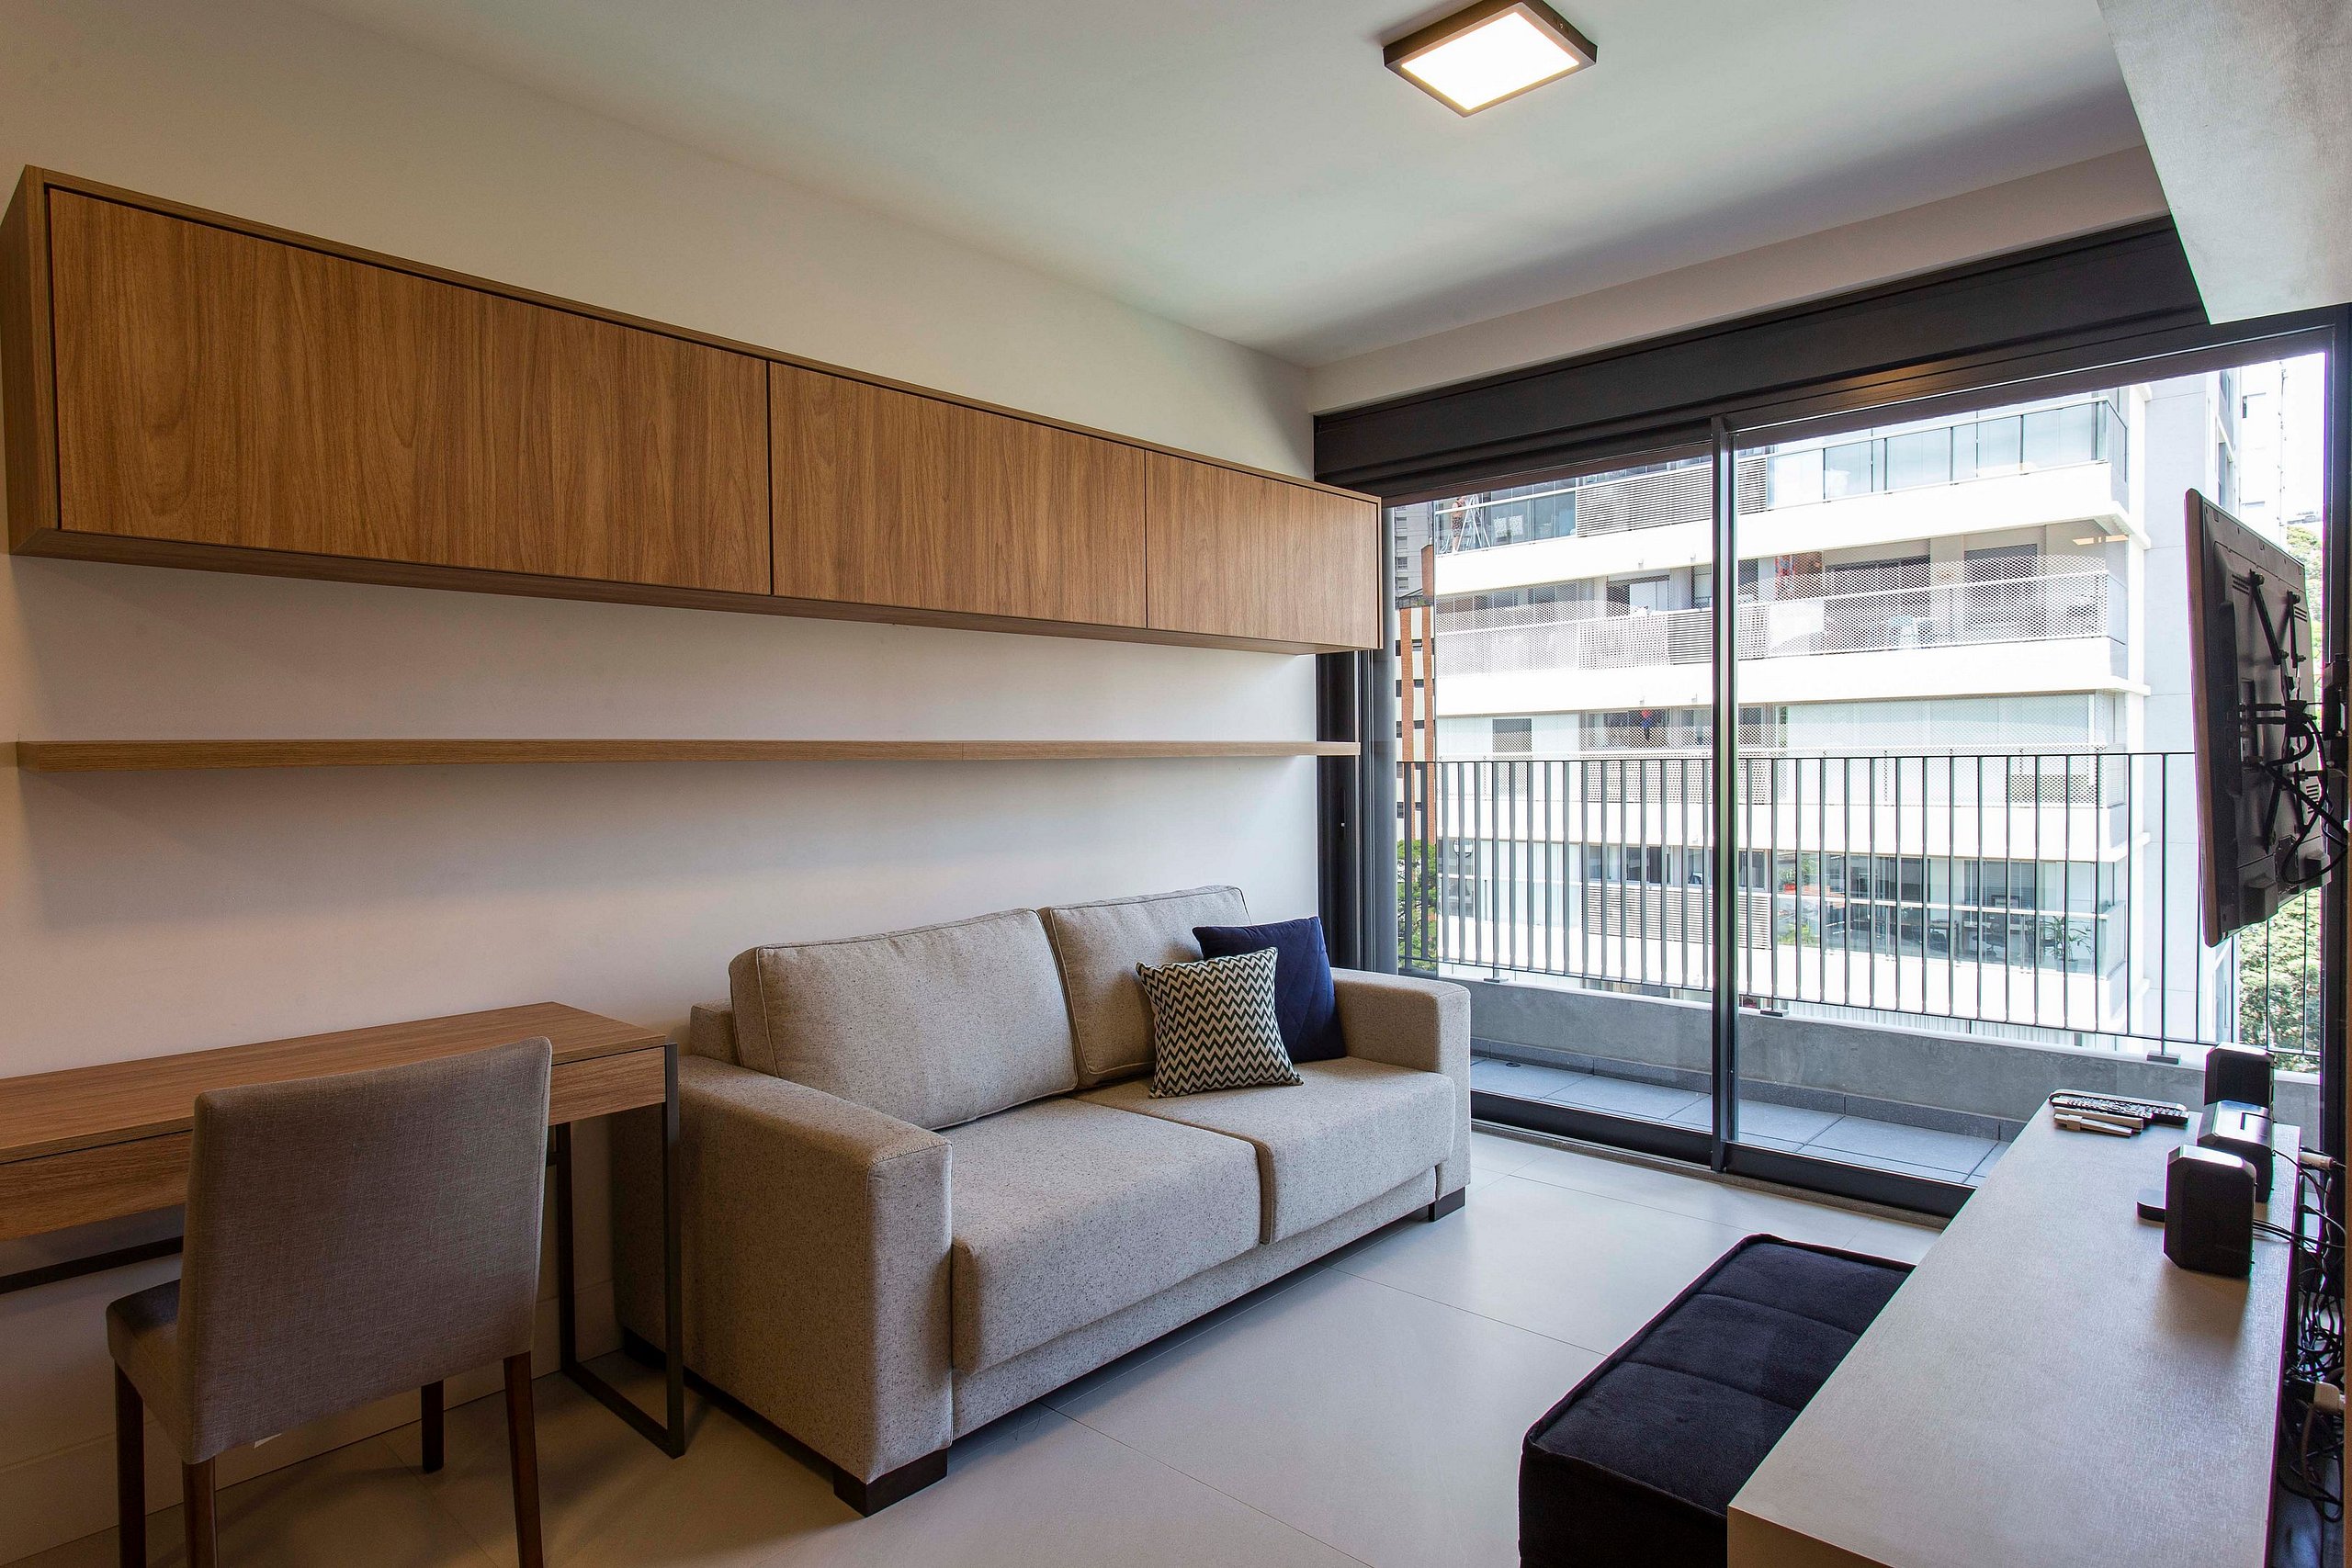 Property Image 2 - New Apartment with A/C and Balcony at Vila Madalena